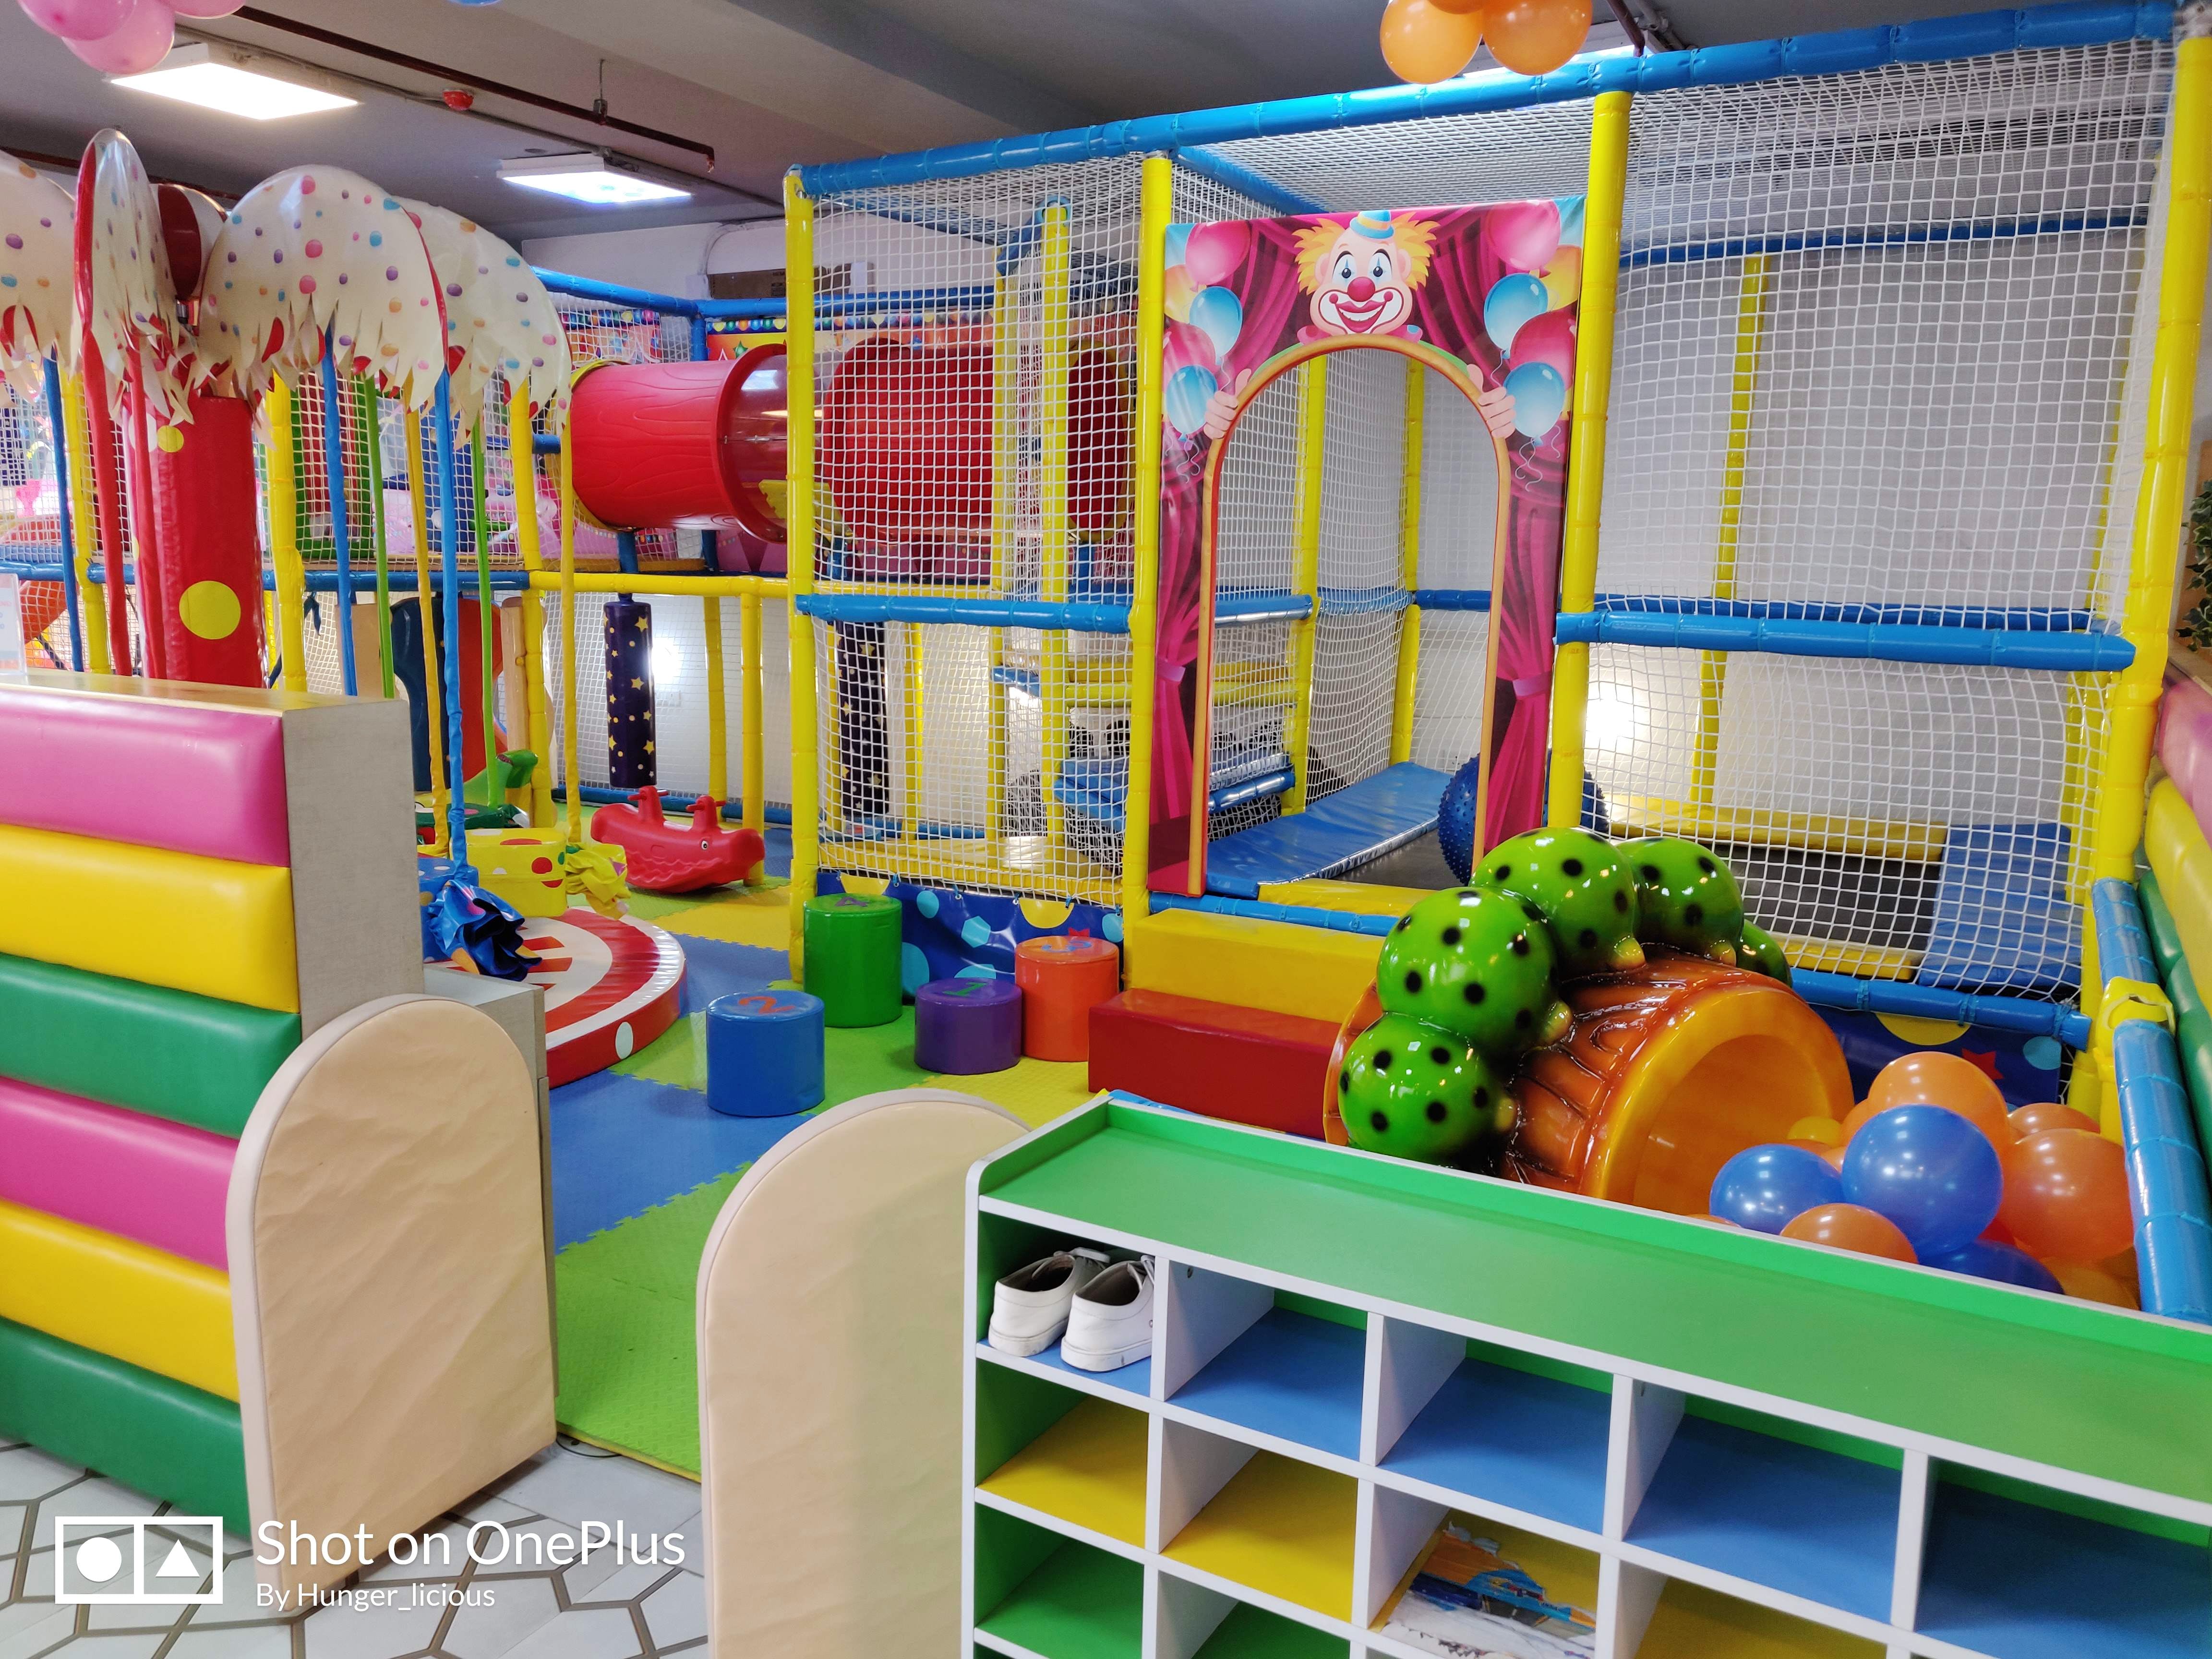 Playground,Public space,Human settlement,Play,Outdoor play equipment,Child,Product,Kindergarten,Room,Toy